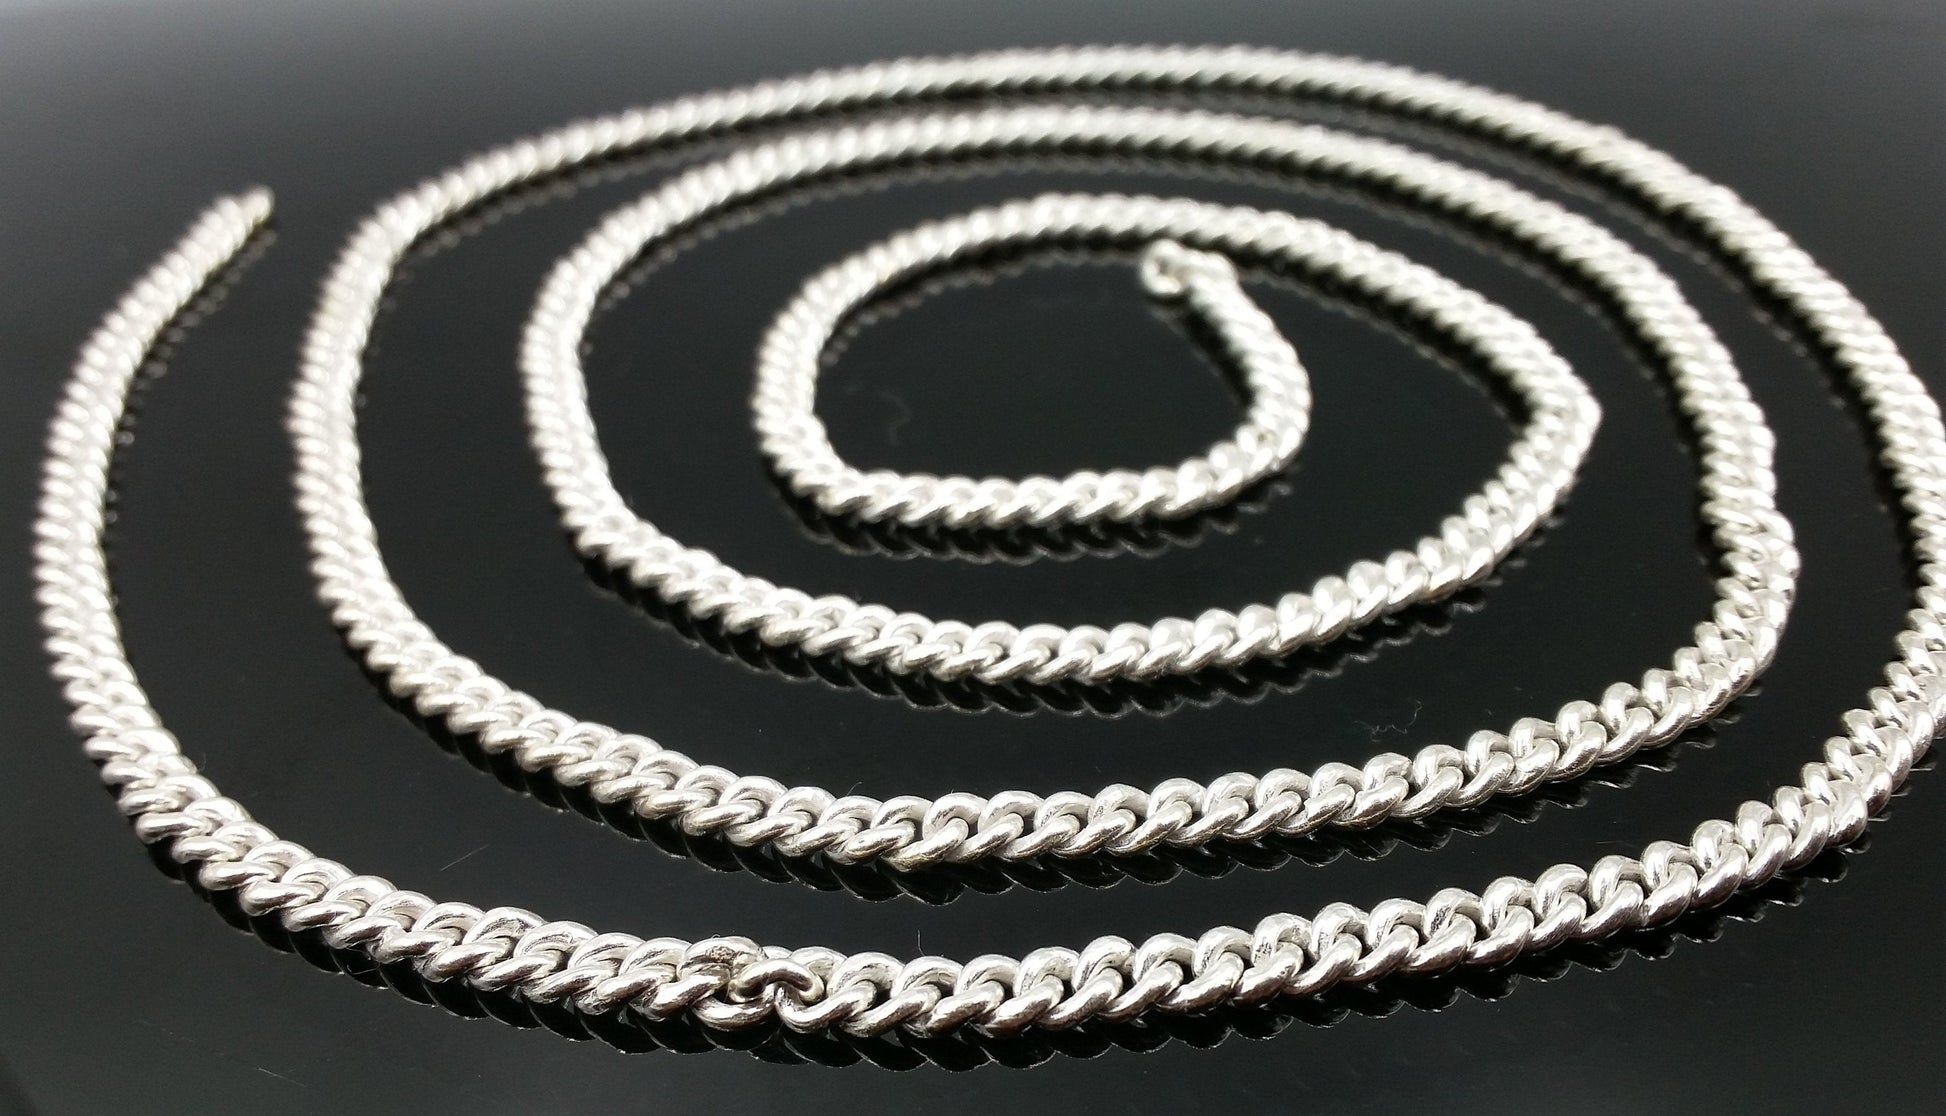 30 inches long solid silver handmade belly chain necklace chain link chain fabulous jewelry for belly dance - TRIBAL ORNAMENTS